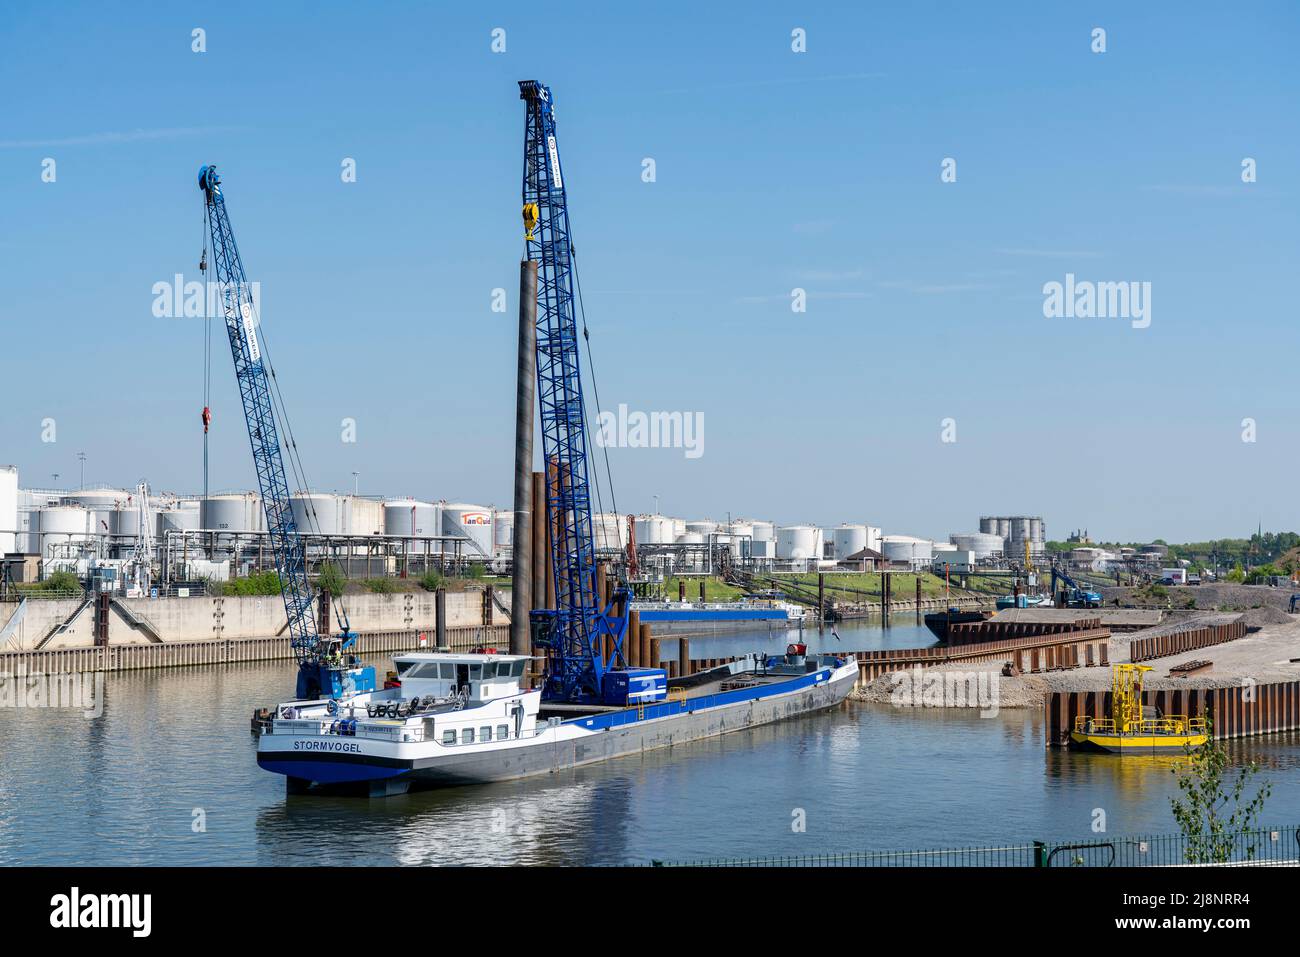 Duisport, Port of Ruhrort, Coal Island, conversion of the old port area into Europe's largest inland trimodal container terminal, land reclamation wor Stock Photo